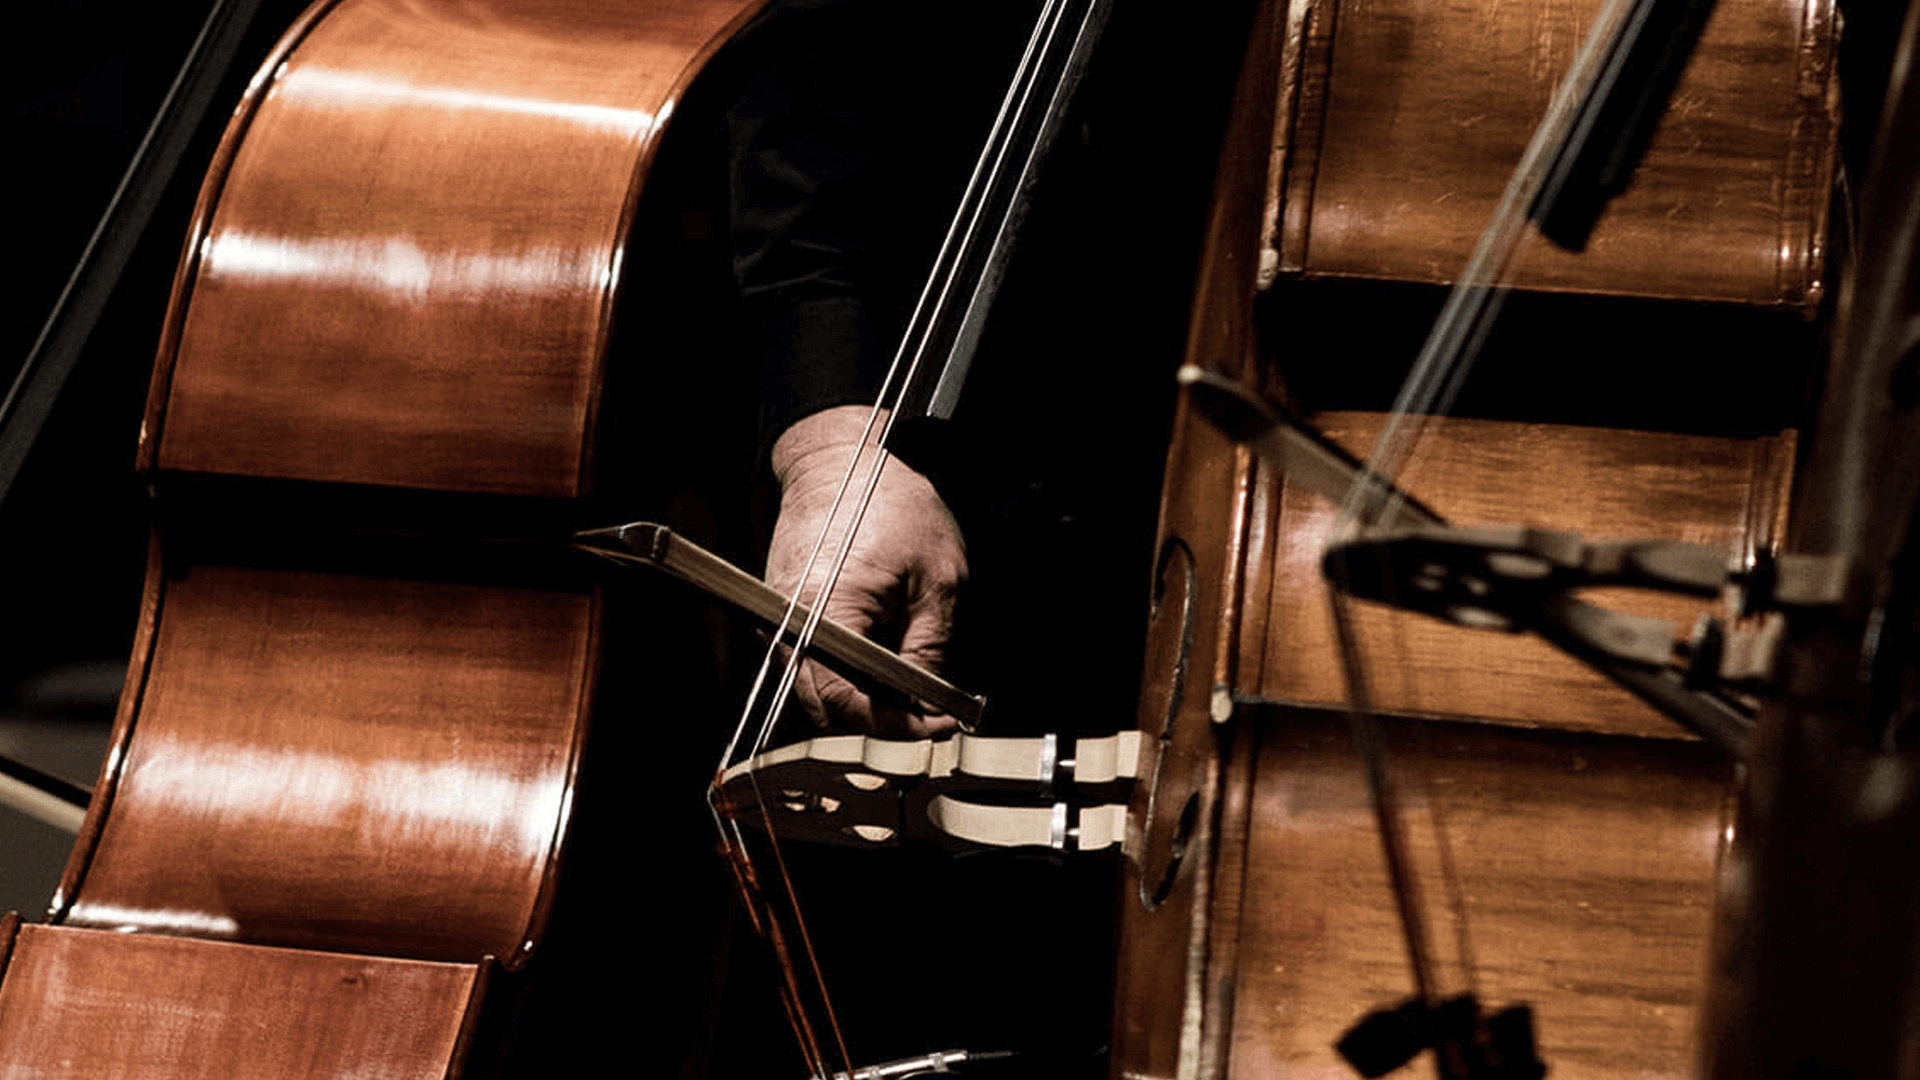 Double Bass: Stringing The Bass With A Bow, Vintage Wooden Instrument. 1920x1080 Full HD Wallpaper.